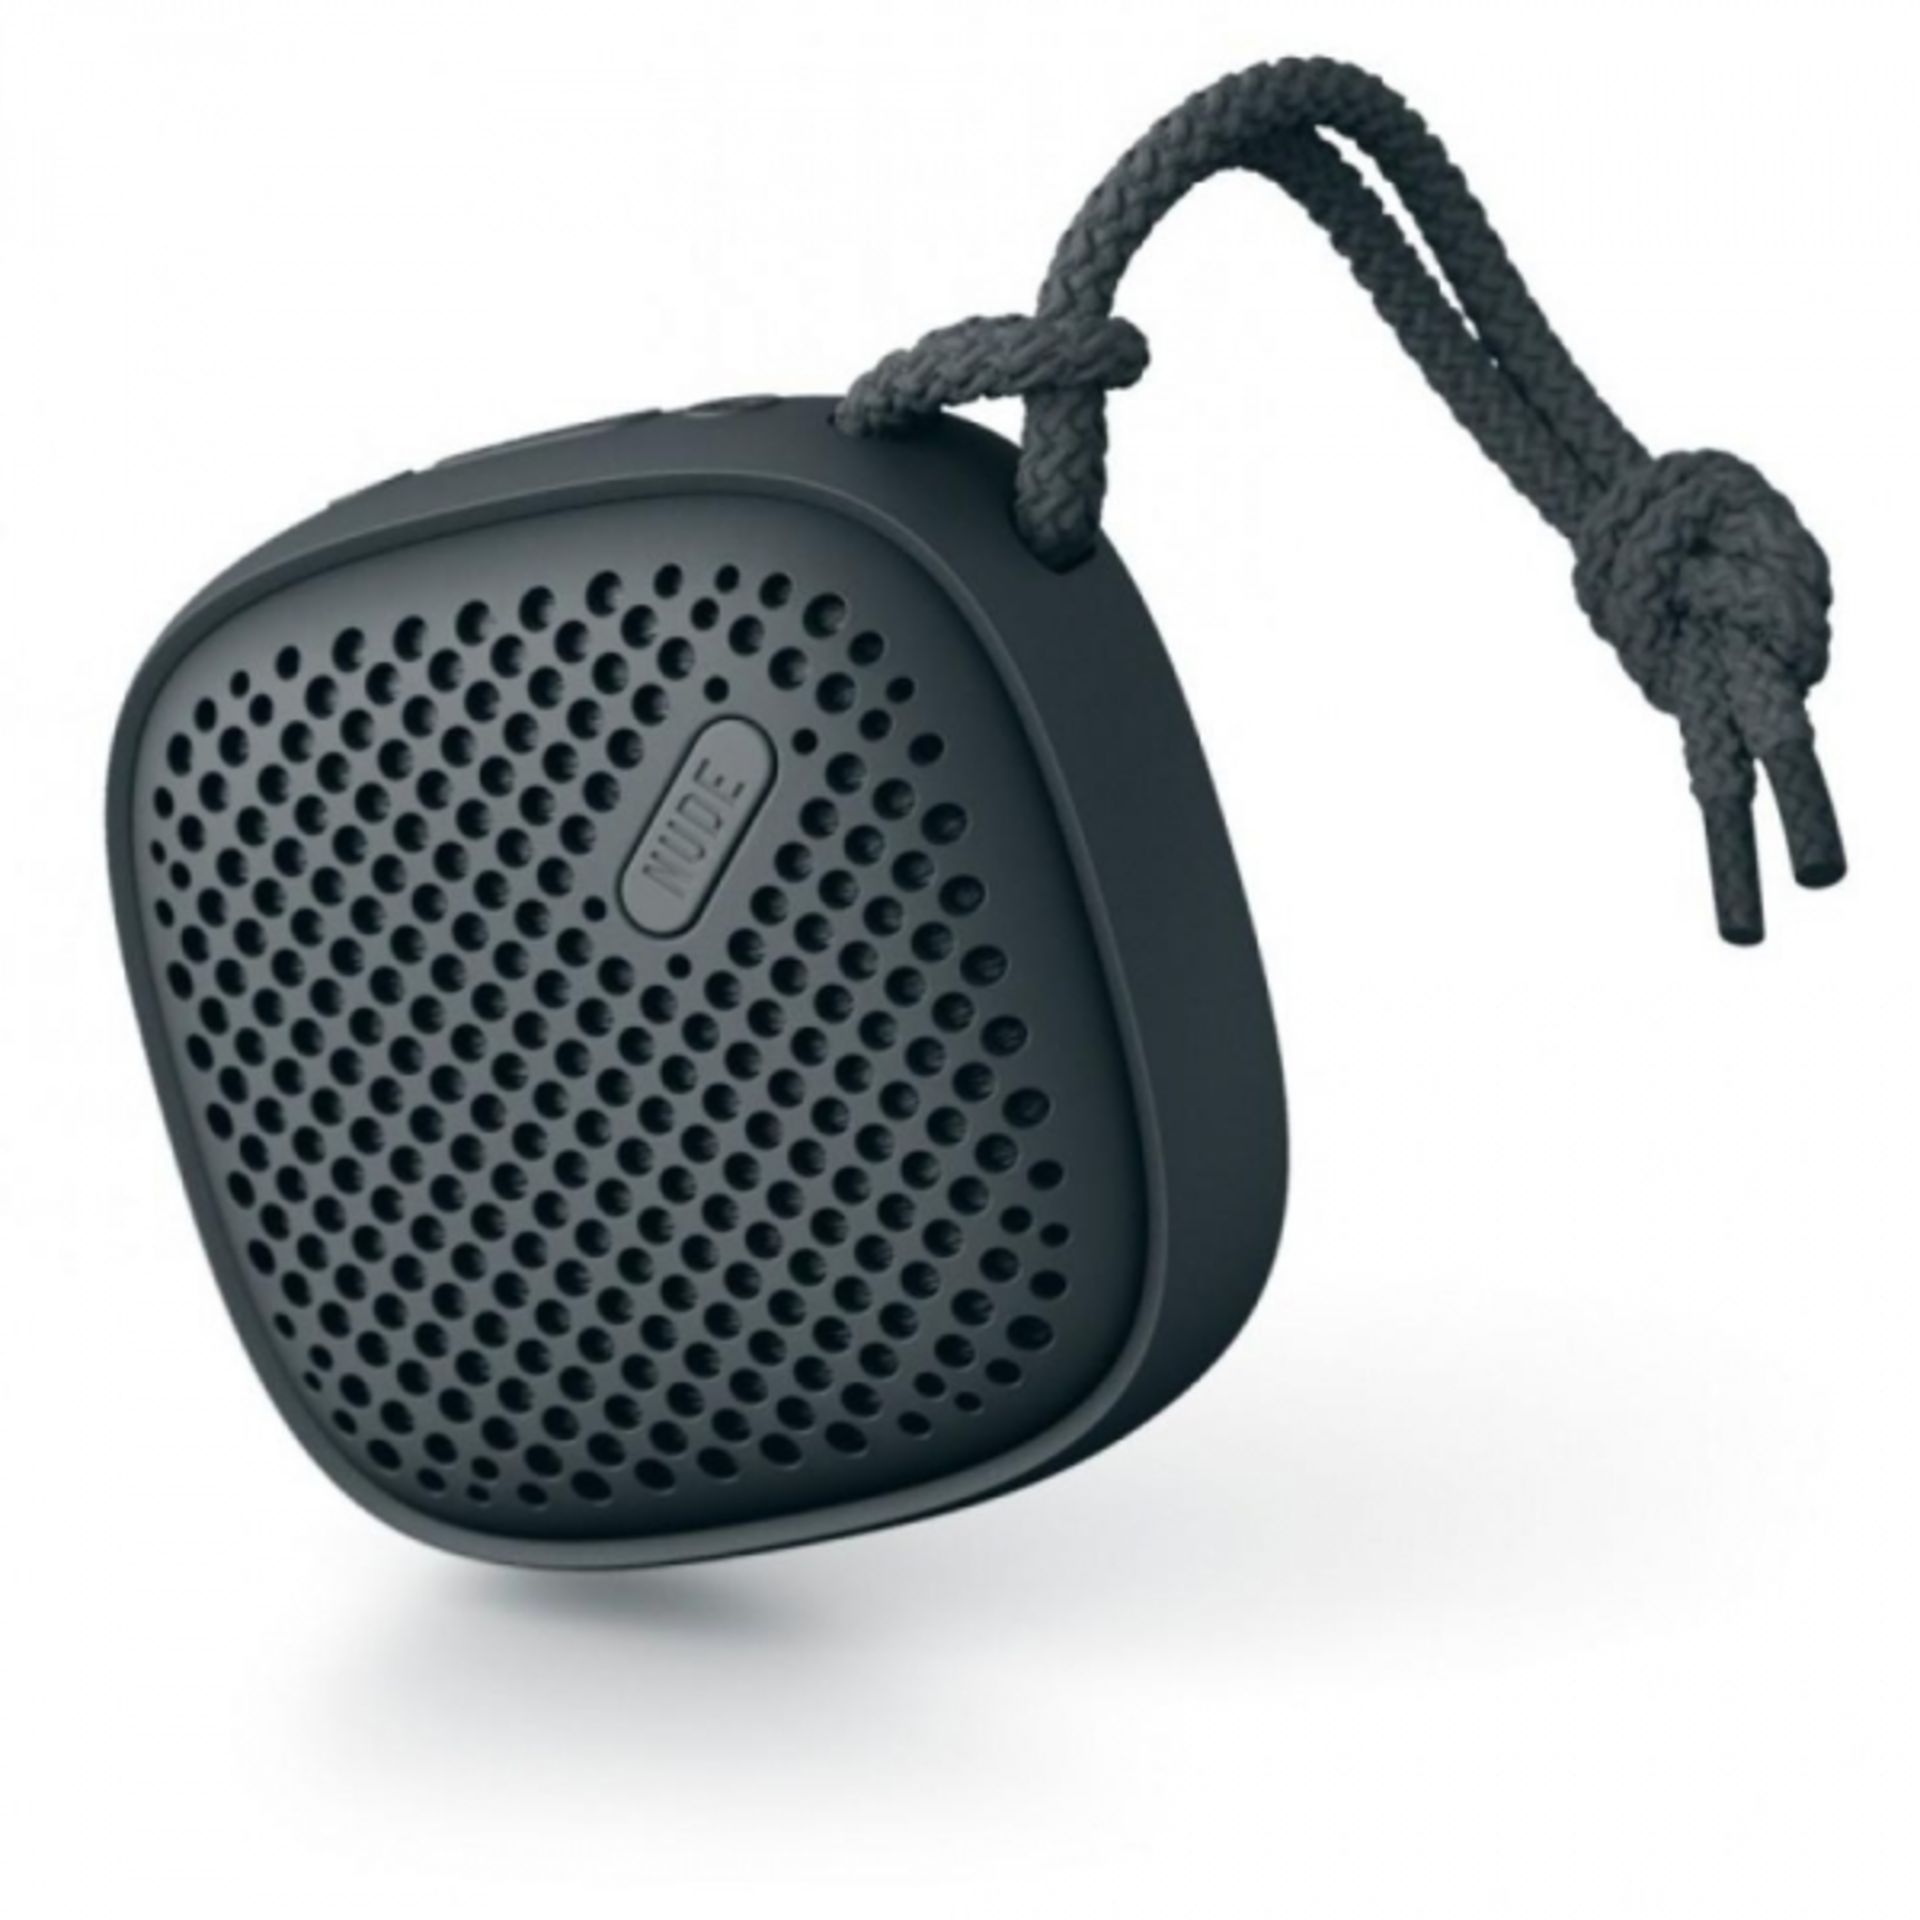 V Brand New NudeAudio Move S Universal Portable Wireless Speaker ISP £29.99 X 2 YOUR BID PRICE TO BE